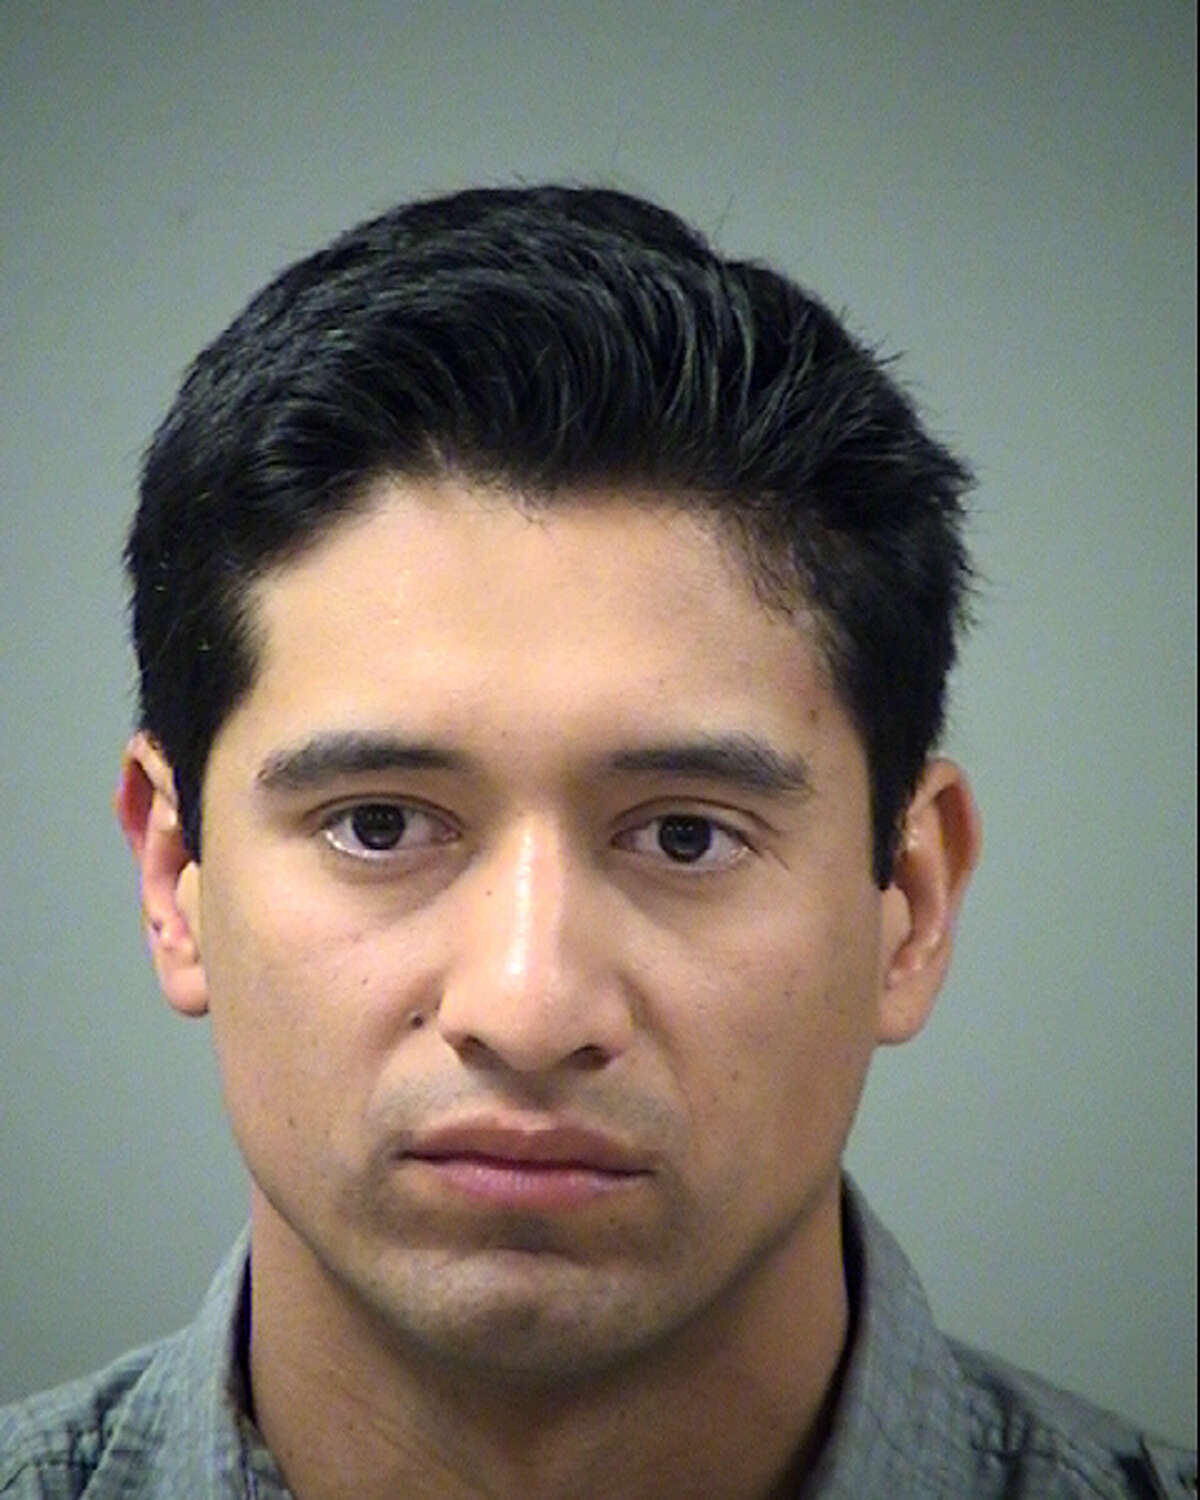 Arthur Lopez, 34, is accused of driving while intoxicated.